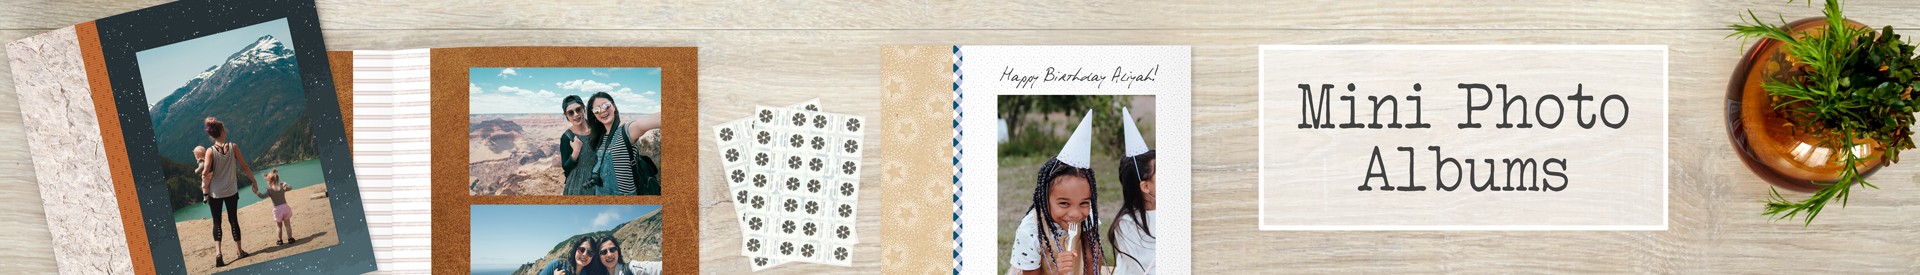 Quick and Easy Small Paper Albums by Creative Memories in themes available for Mother’s Day and Father’s Day, My First Photo Album and NSD and Croptoberfest, these mini albums make the perfect gift for parents, grandparents, friends, teachers, birthdays and more!